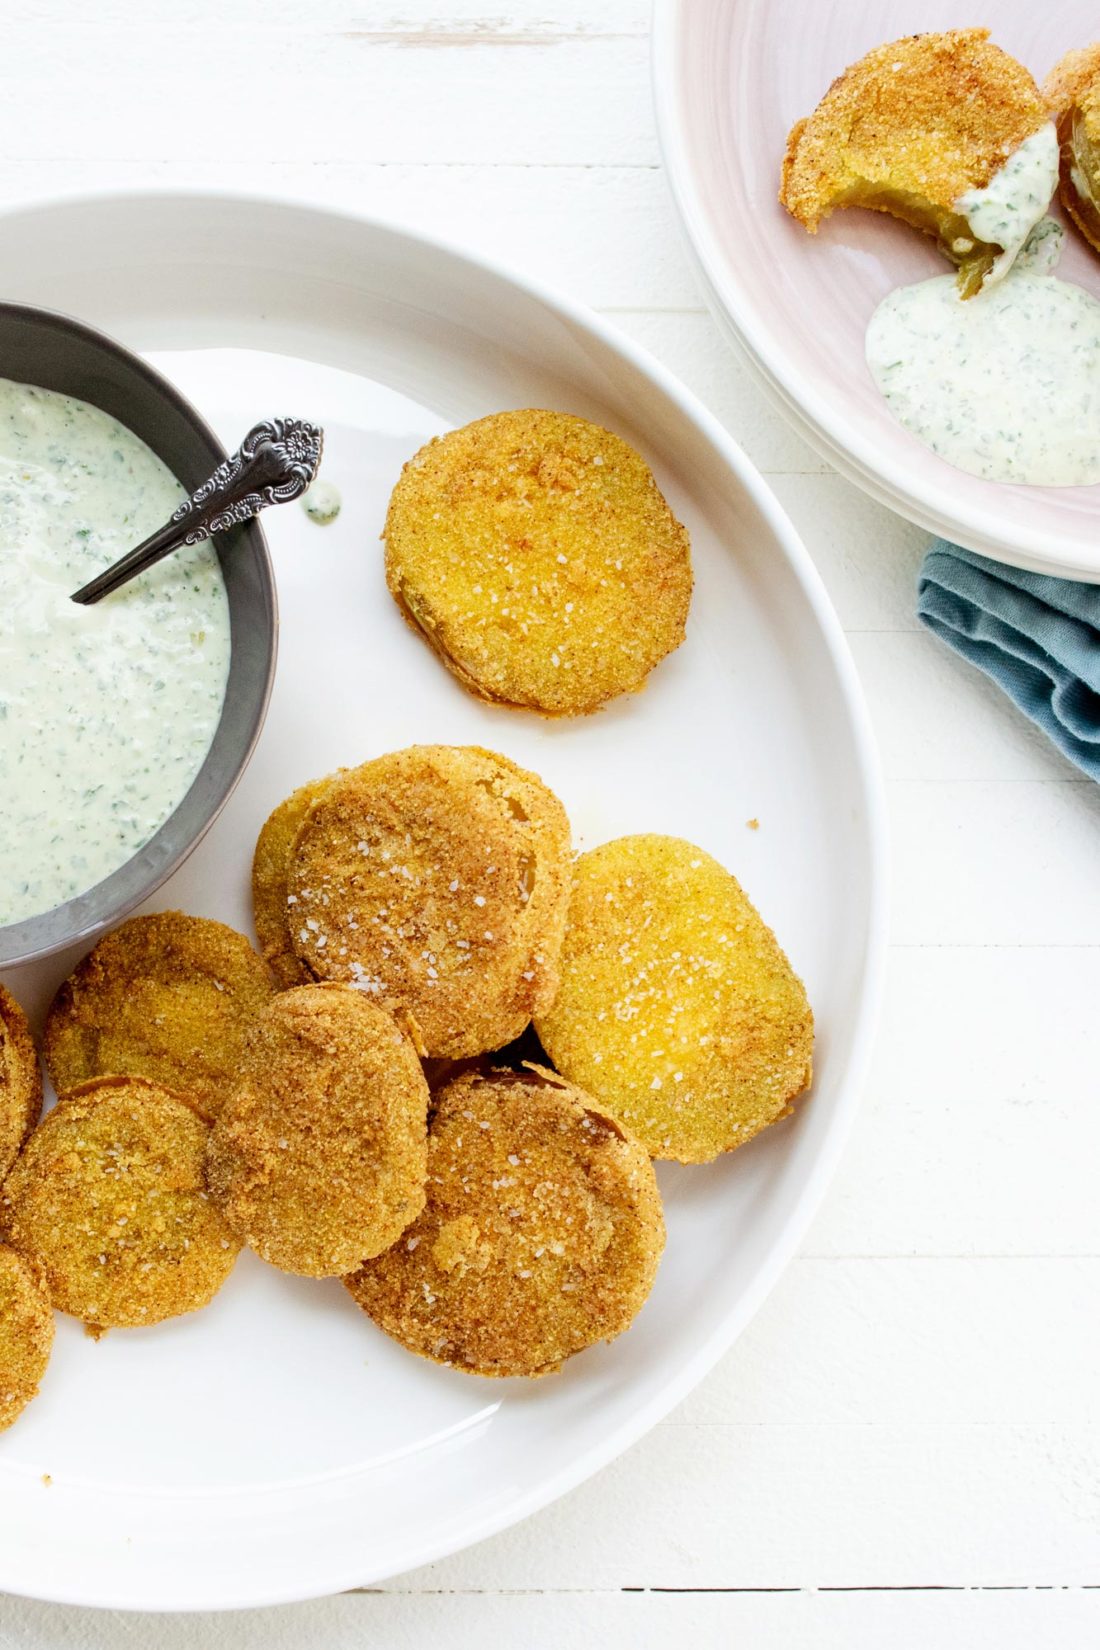 Fried Green Tomatoes on a plate with a bowl of Green Goddess Dressing.